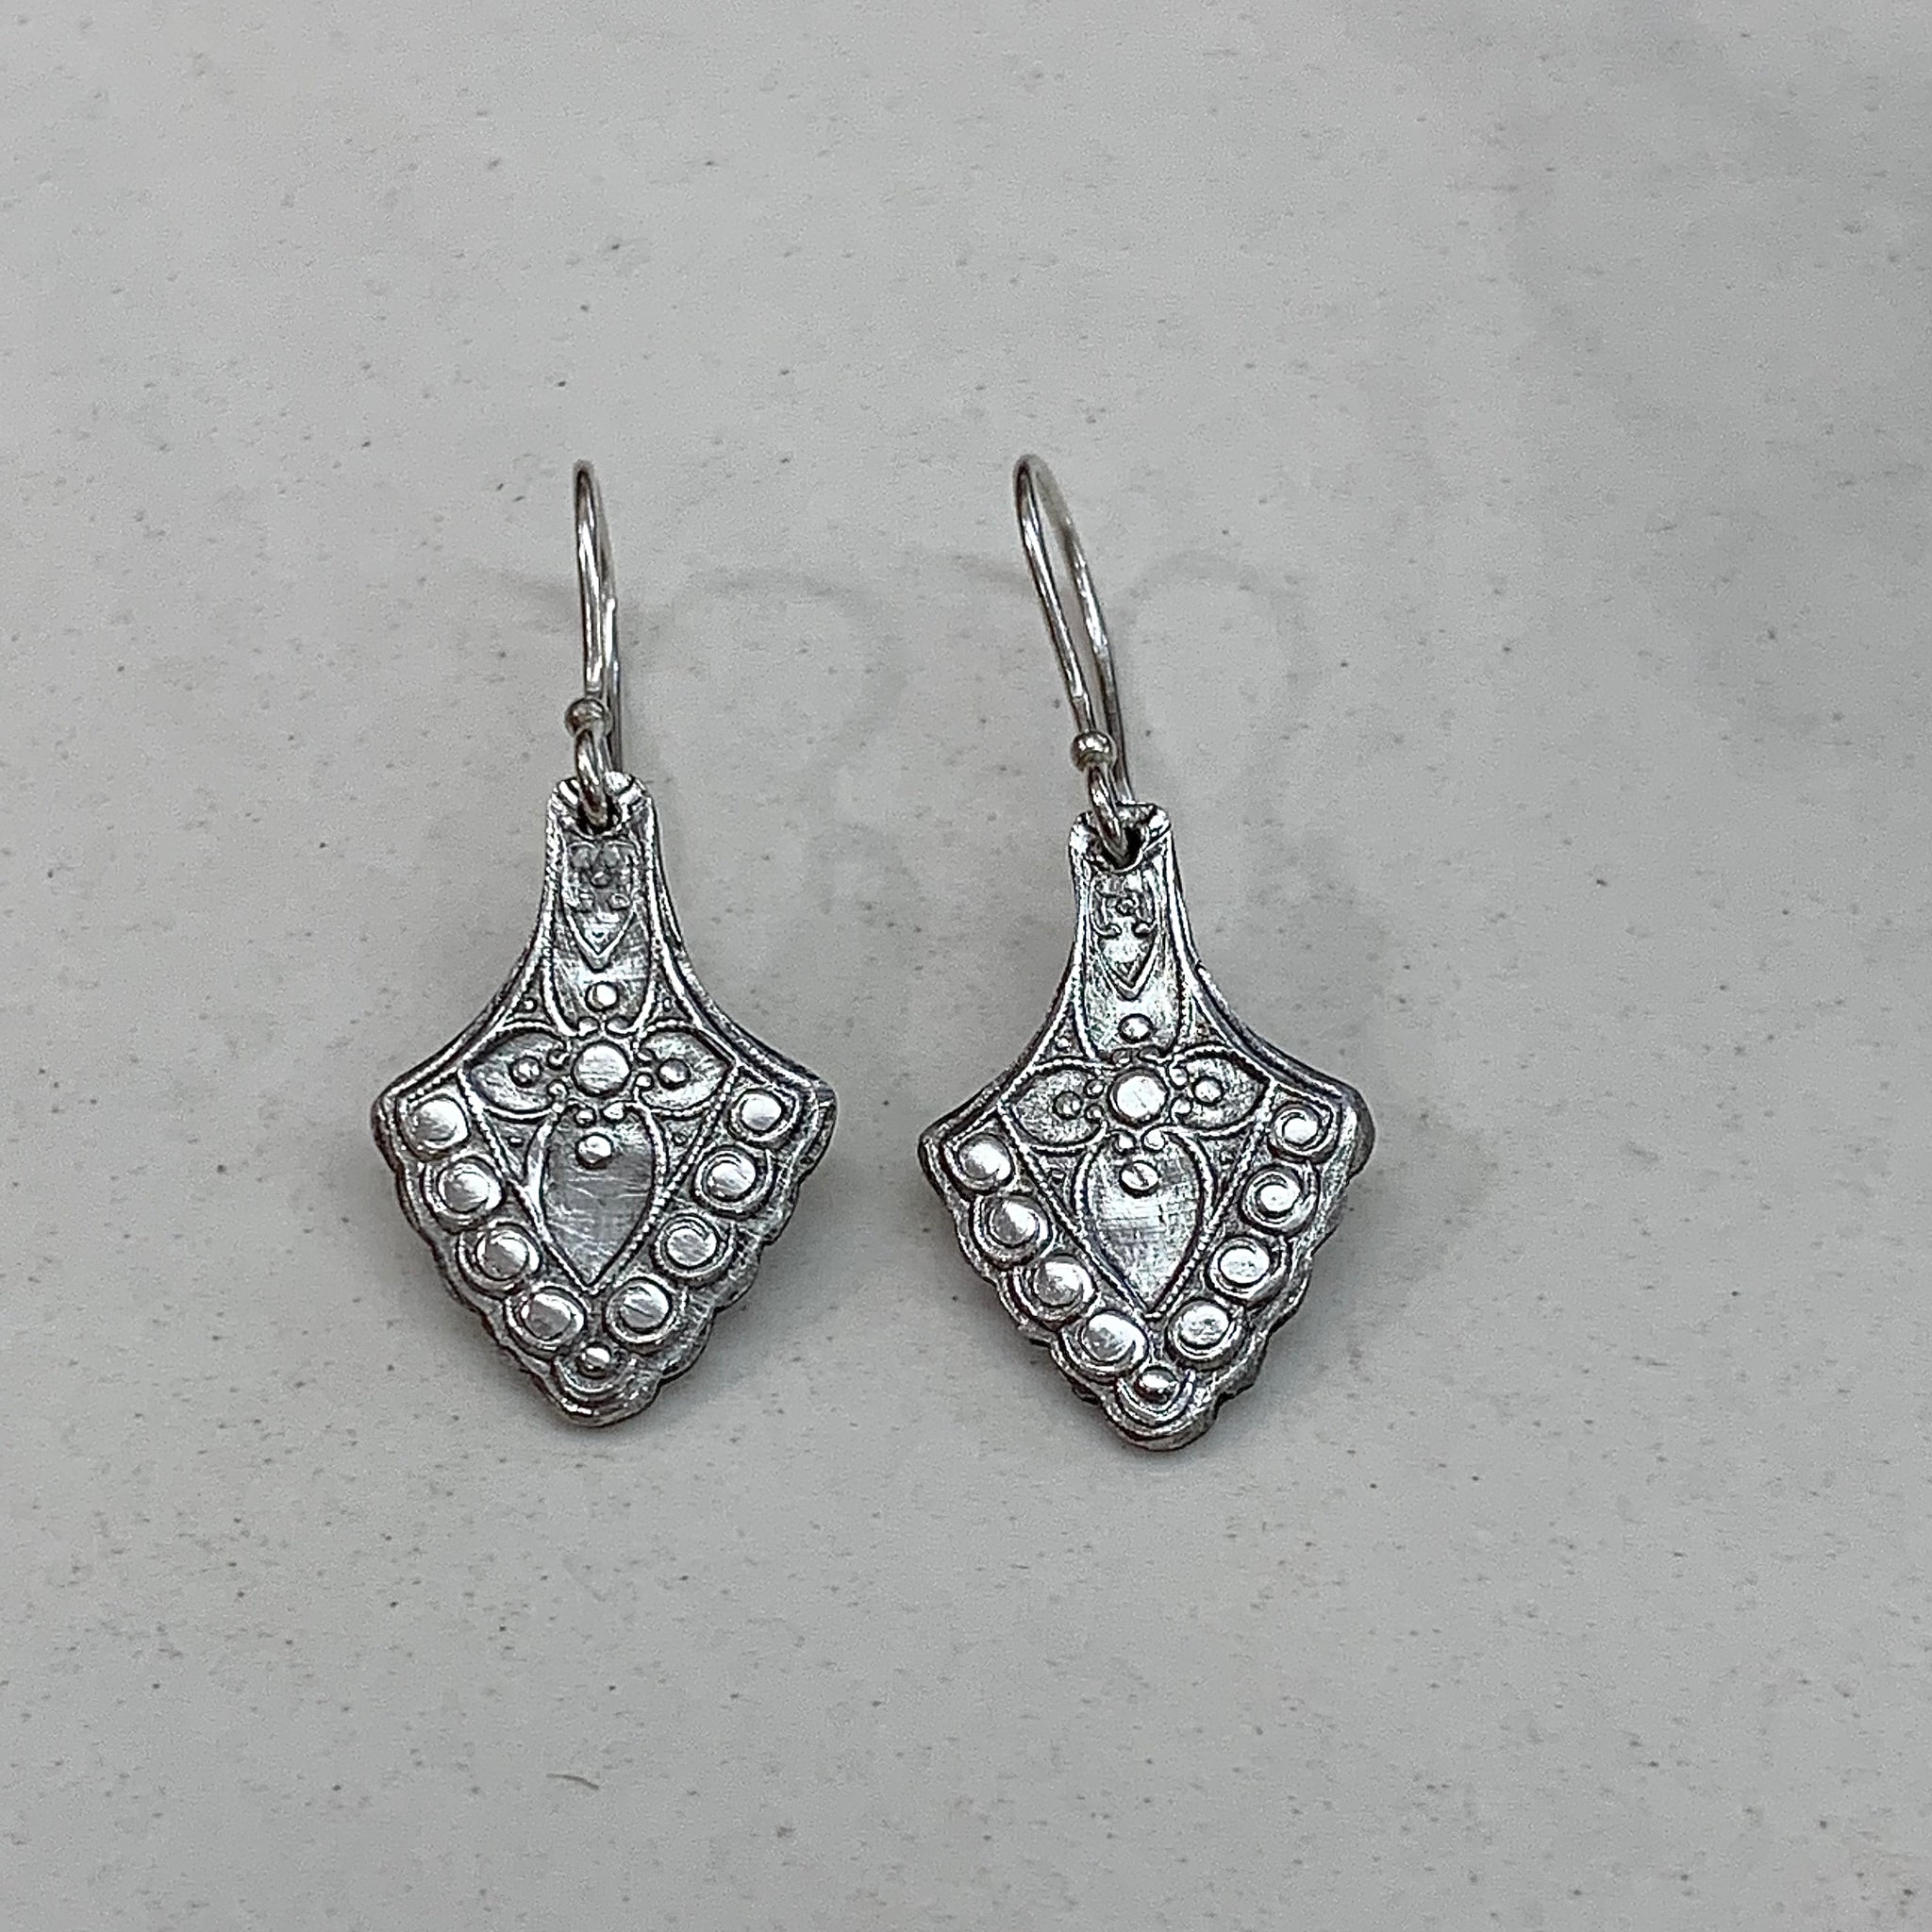 Pewter Collection - Arrow earrings